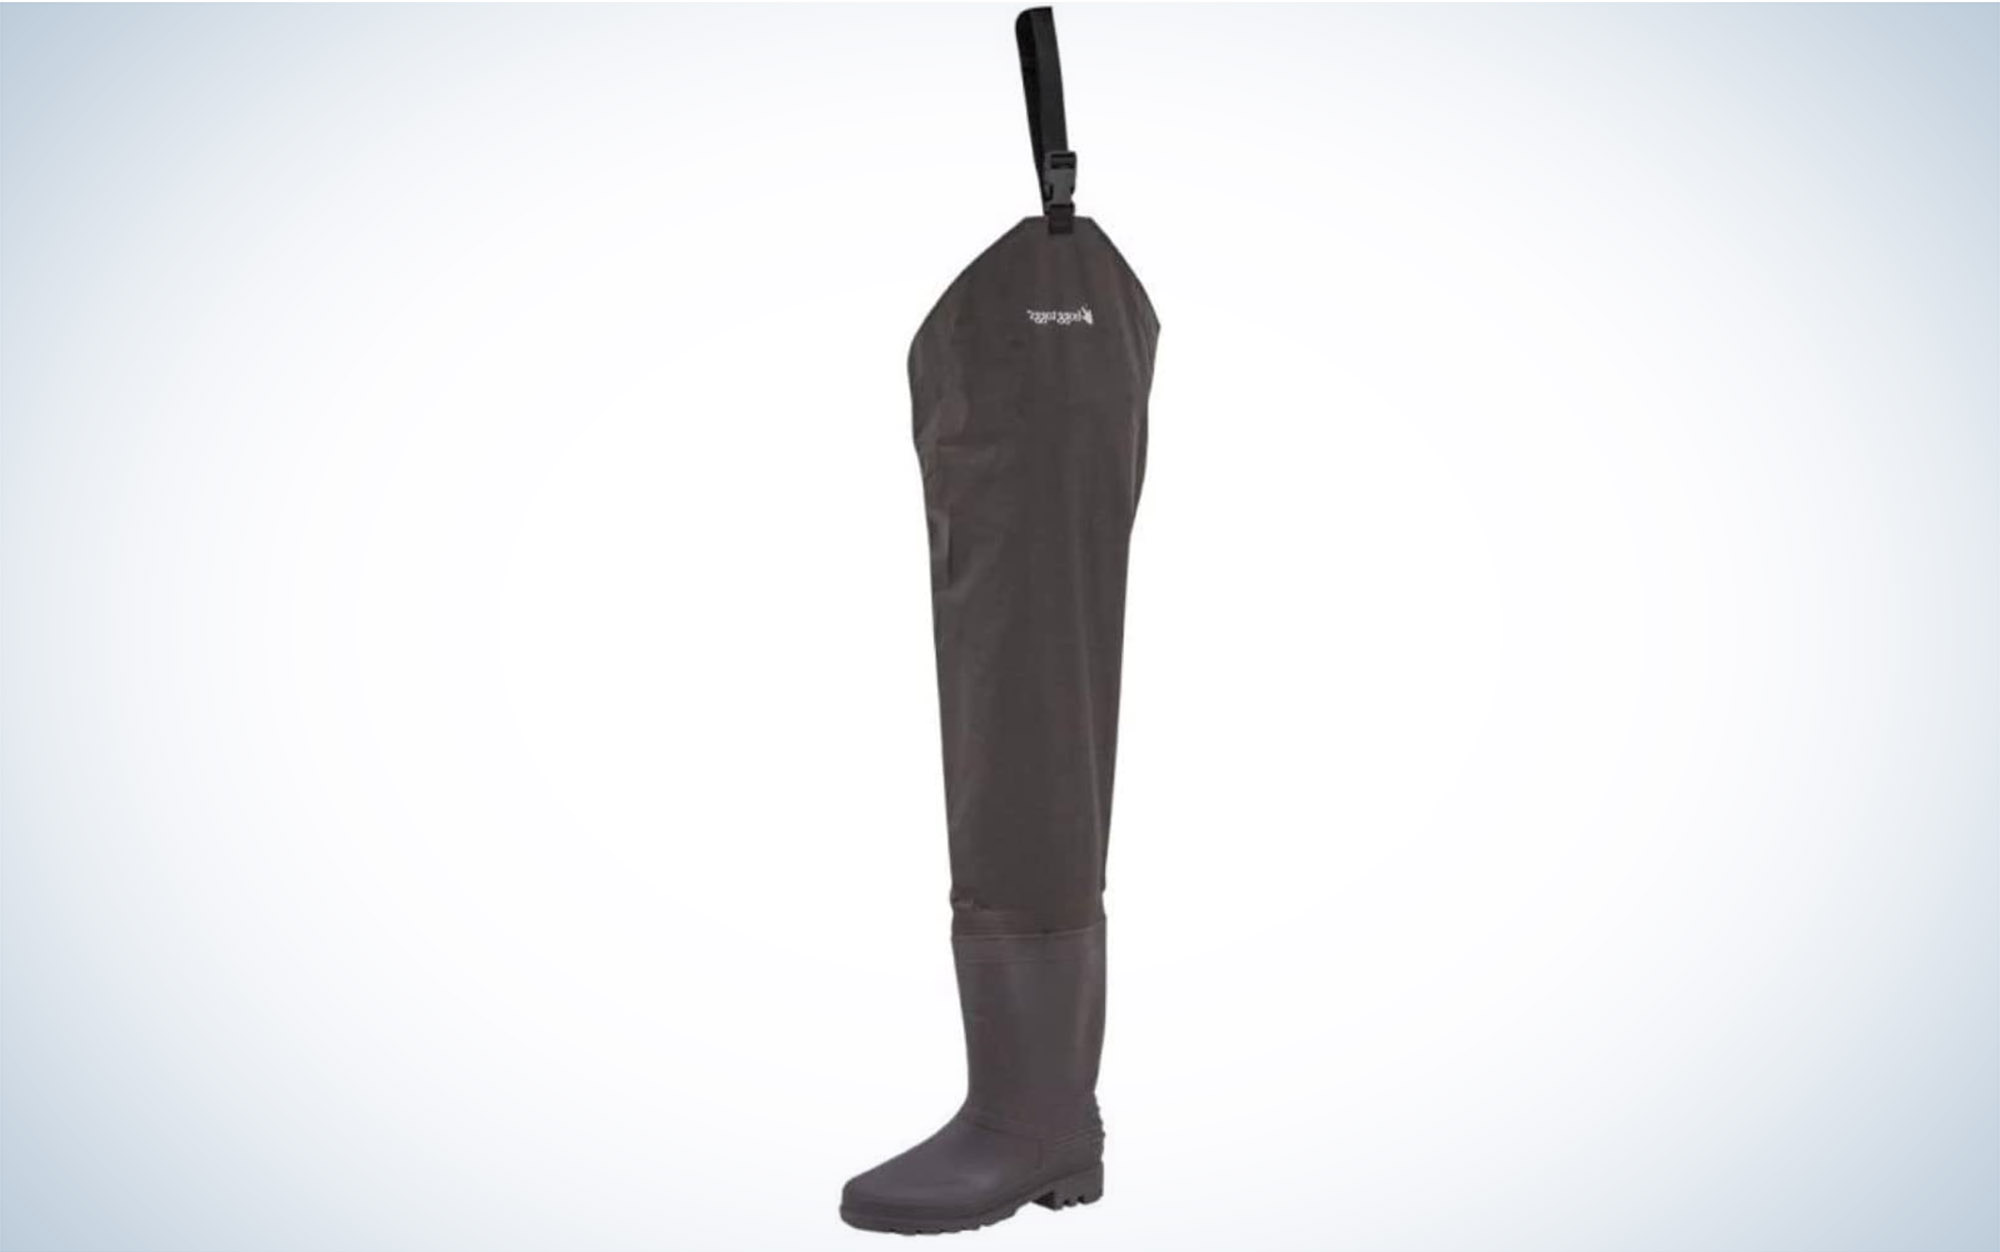 We reviewed the Frogg Toggs Menâs Rana Hip Wader.